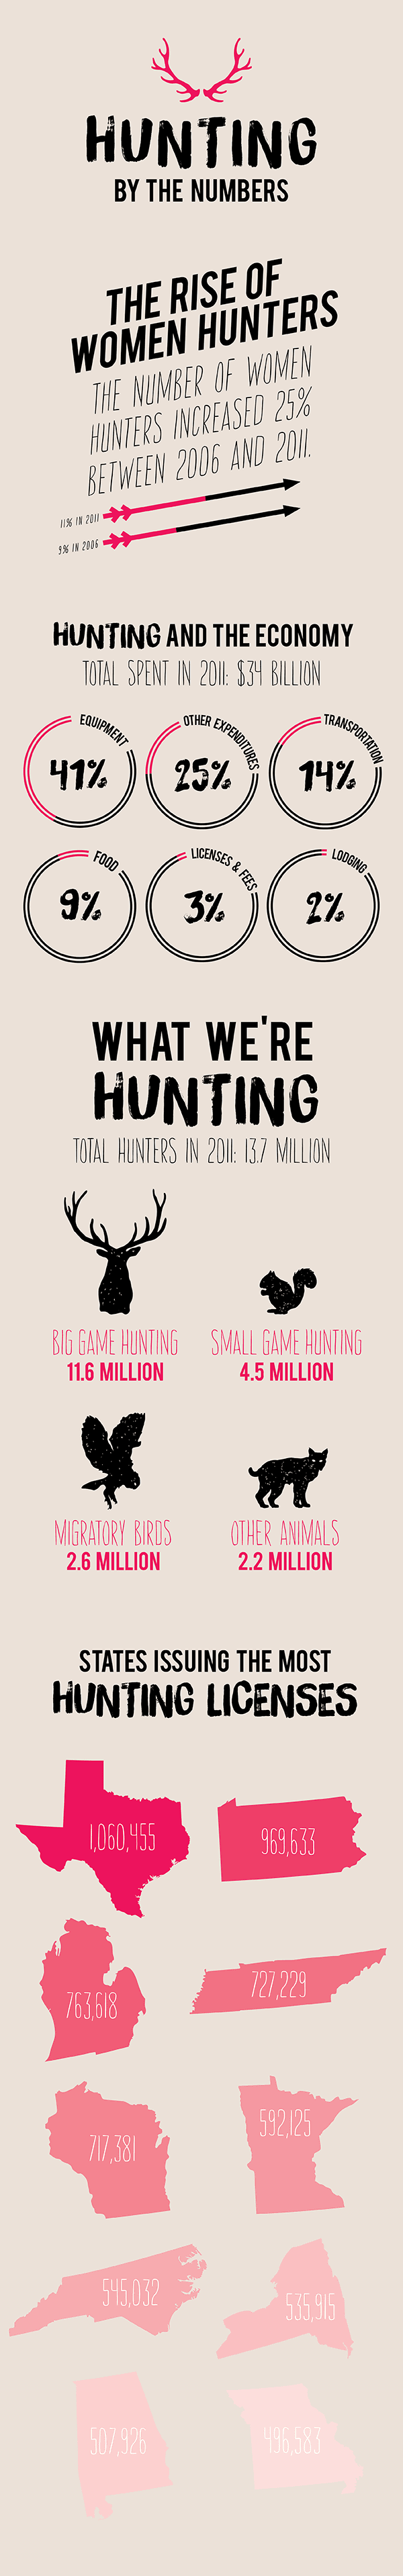 Hunting By The Numbers